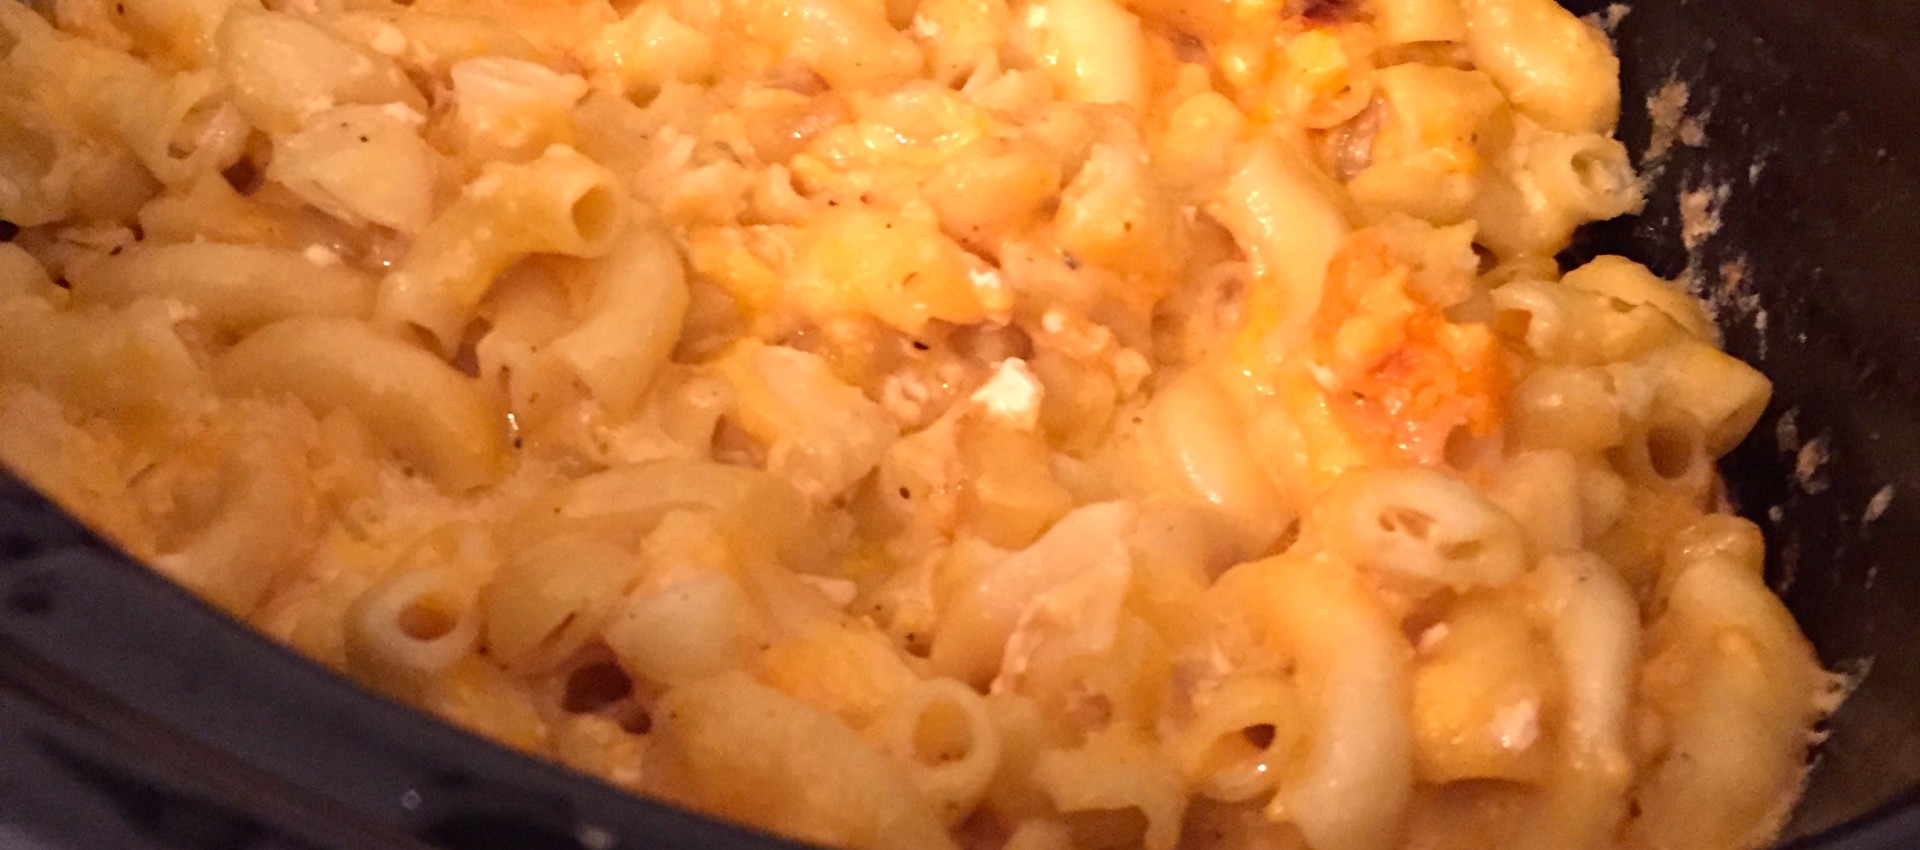 Mac & Cheese in a Slow Cooker